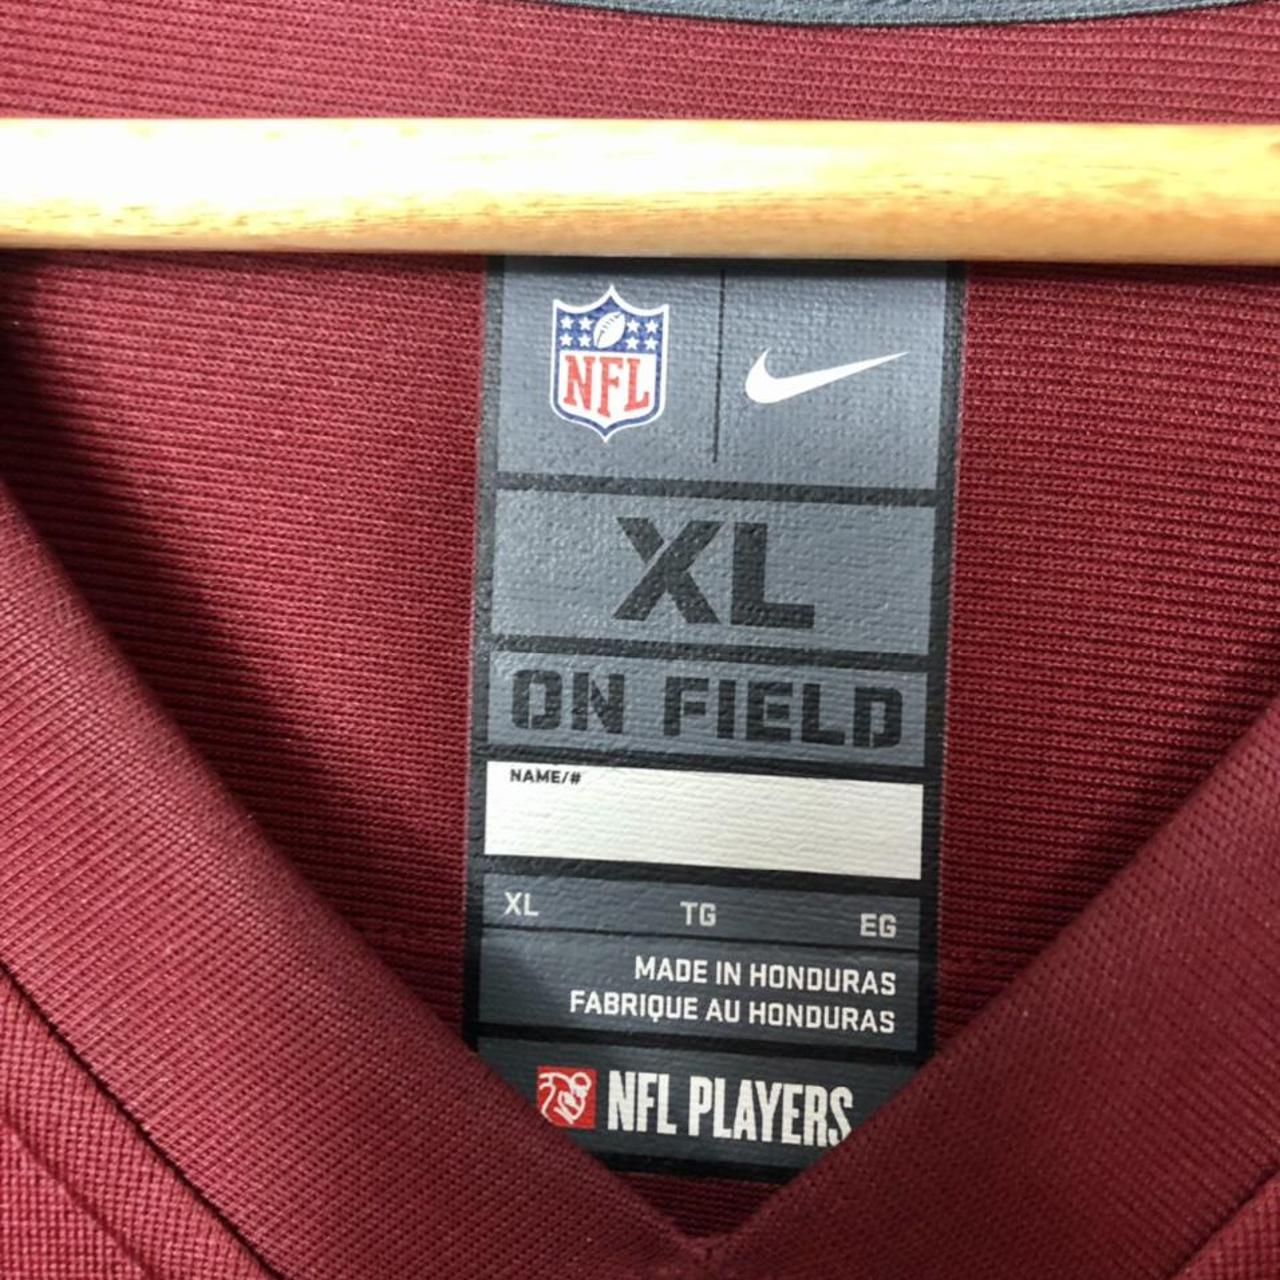 Product Image 3 - Authentic Nike NFL Jersey ✅

Genuine